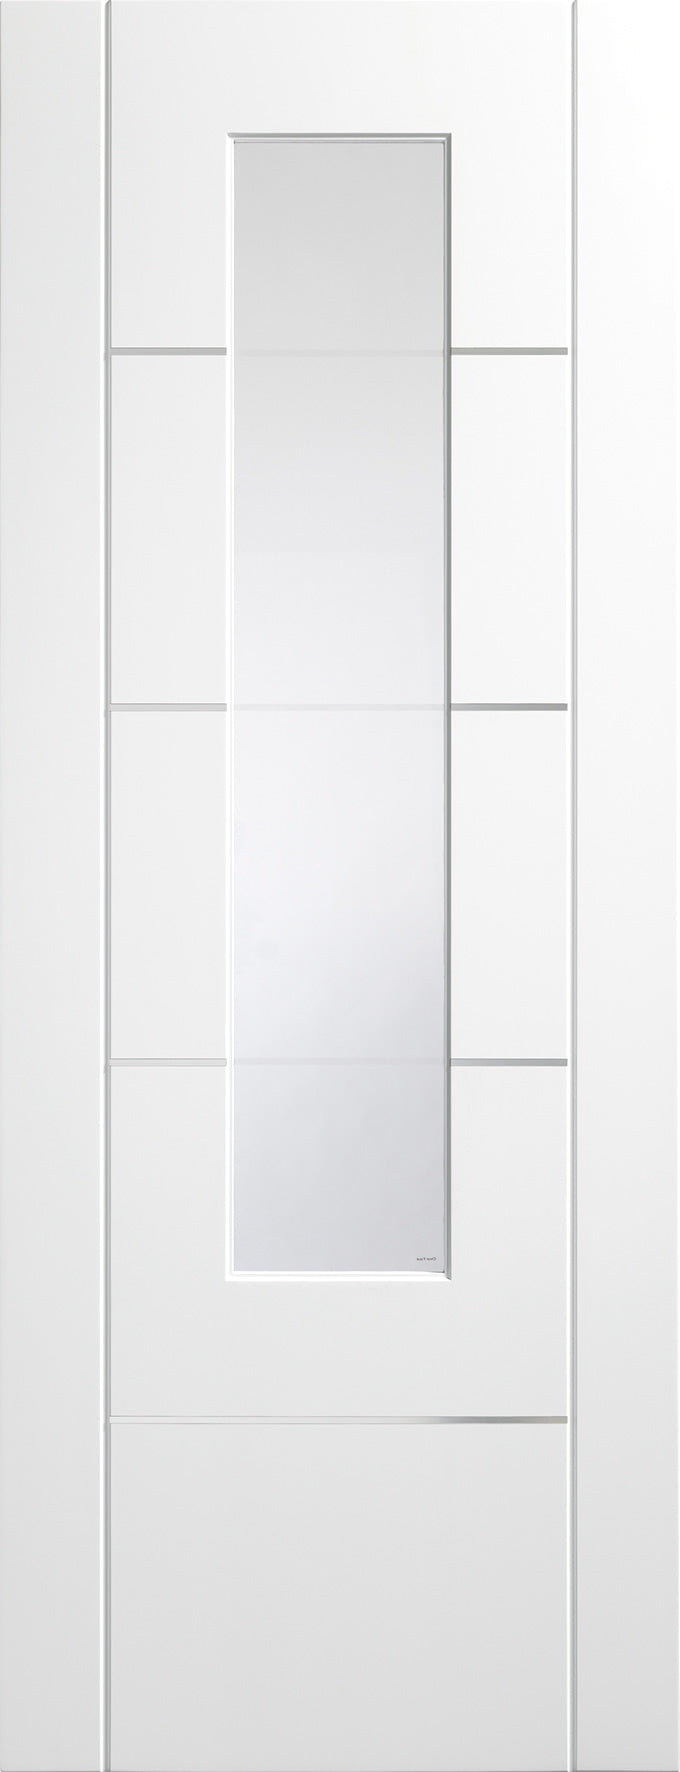 Portici prefinished white Internal door with clear etched glass.